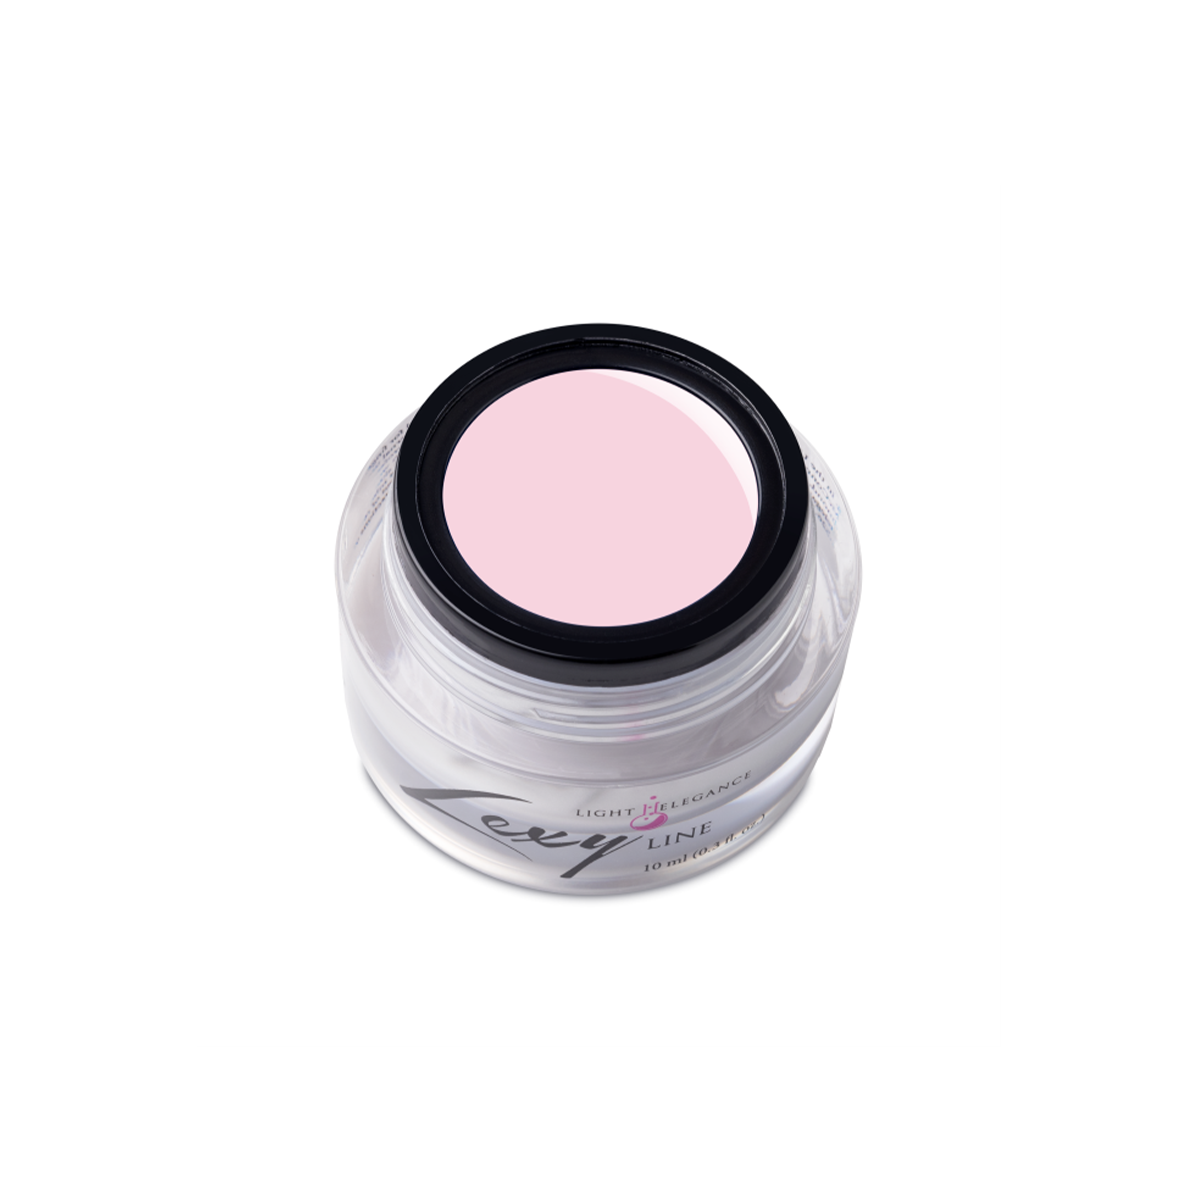 Soft Pink Extreme Lexy Line Building Gel